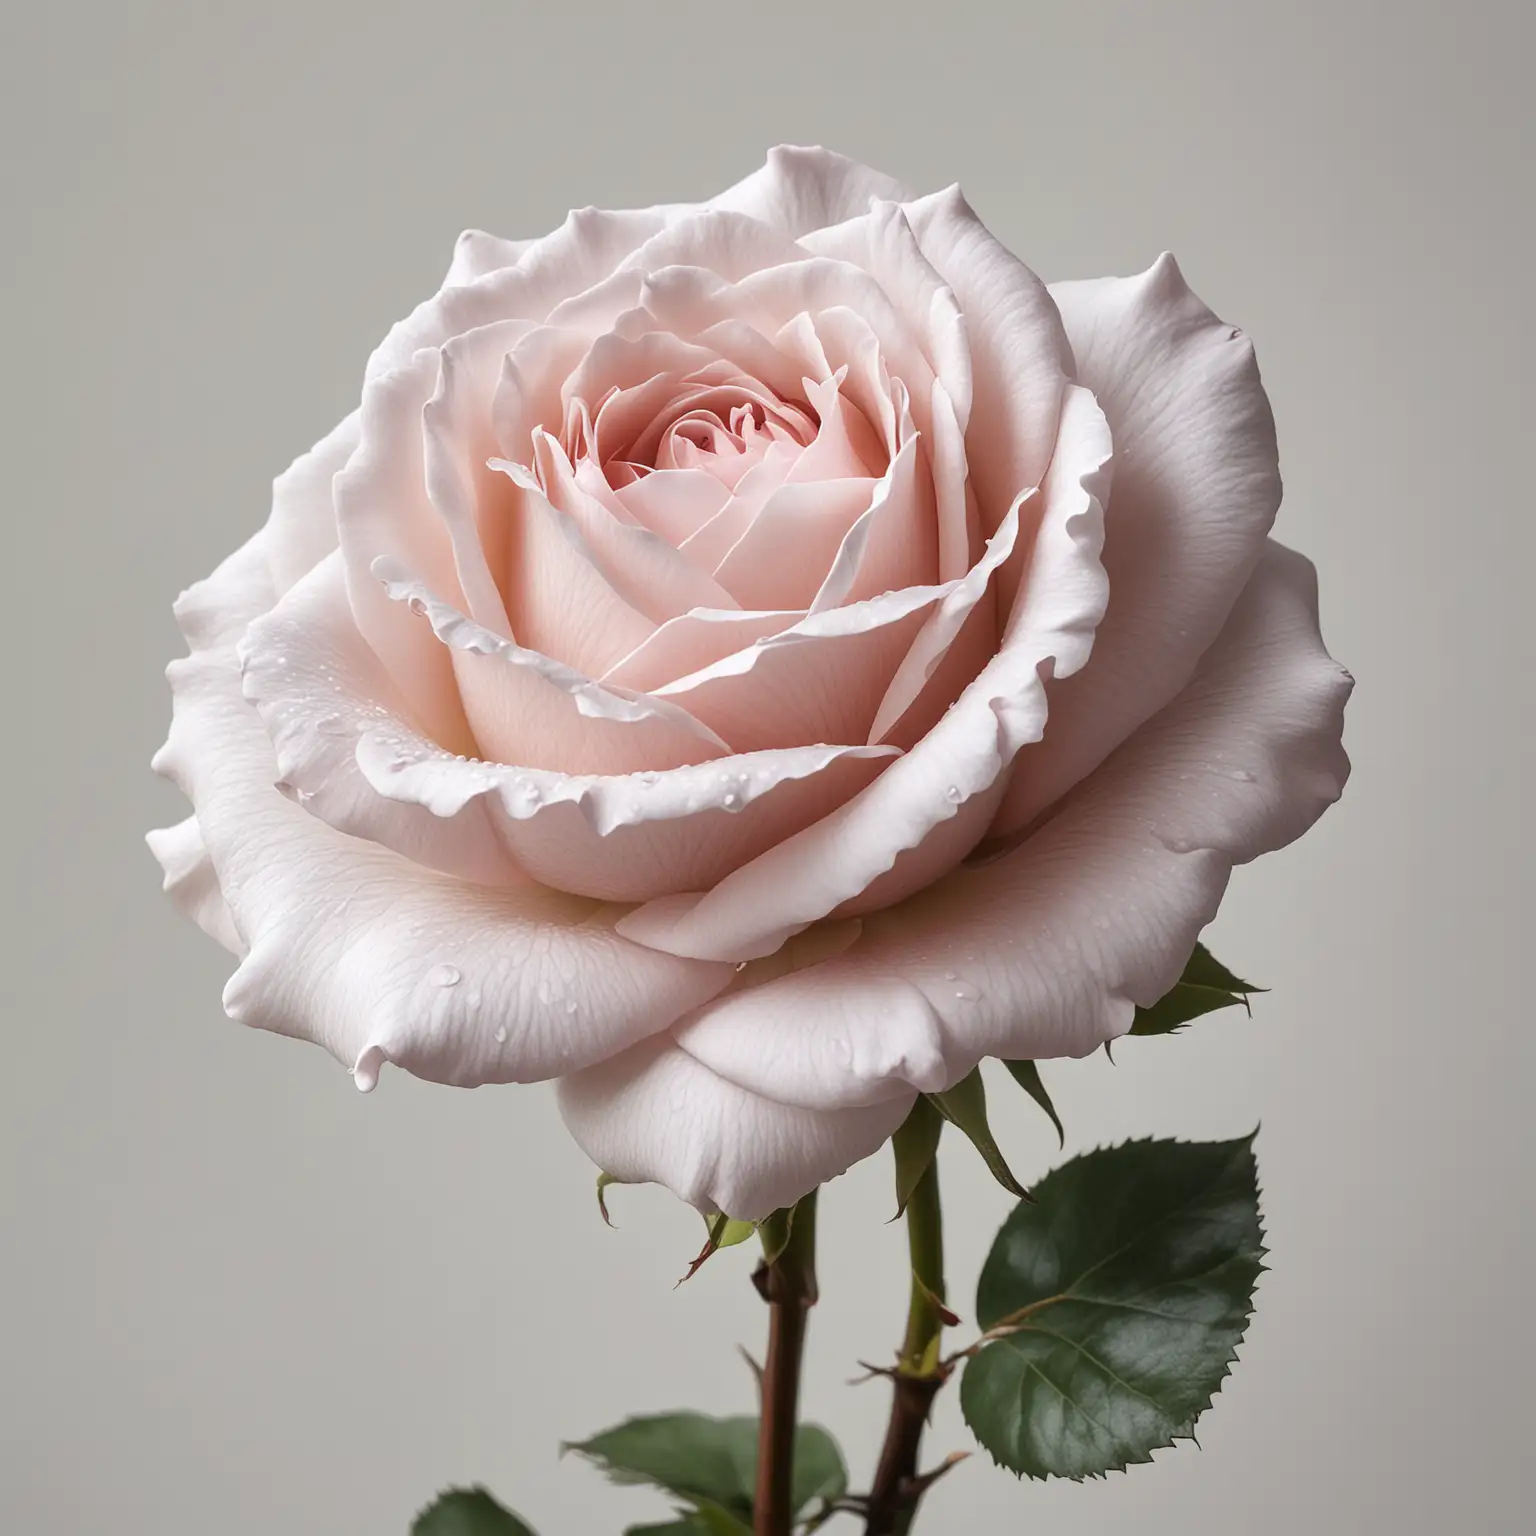 Realistic single garden rose, very pale pink,  on a solid white background in a moody tone